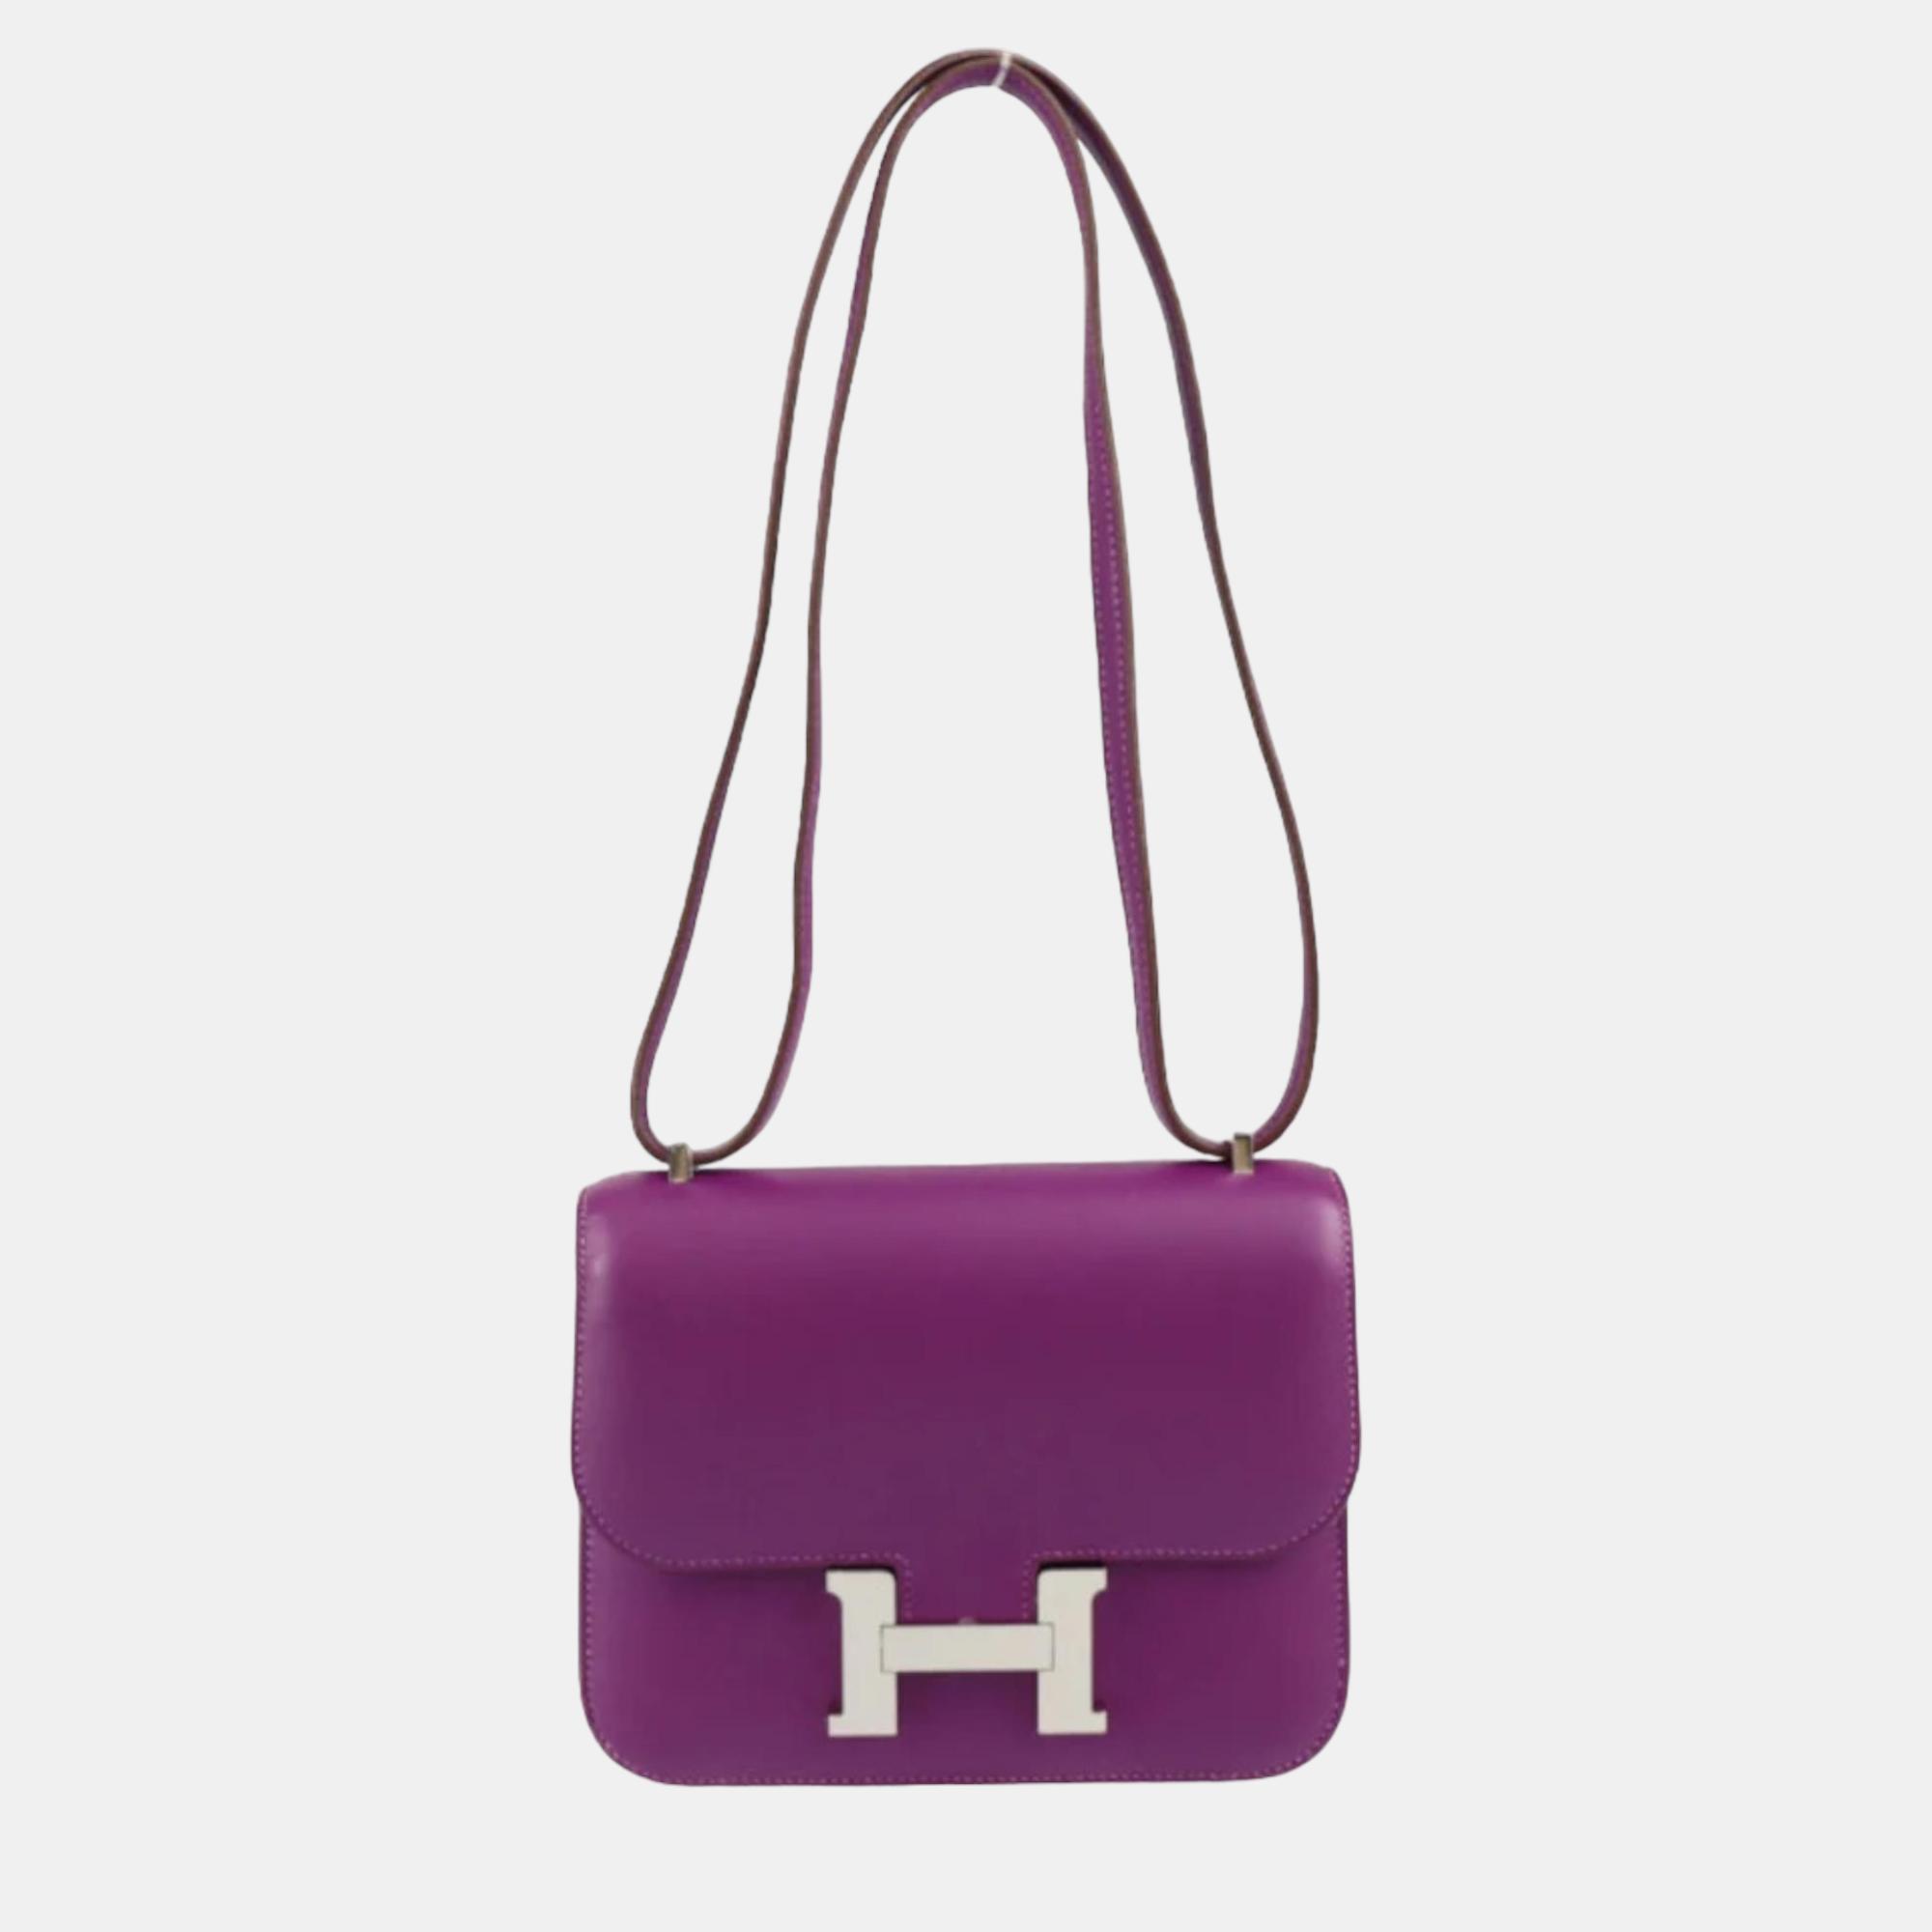 Hermès handbags are known for their unique designs that emanate the labels elegant flair and the labels immaculate craftsmanship makes their creations last season after season. Here is a stunning bag meticulously crafted and stitched to perfection. Truly a refined elevation for your ensemble.